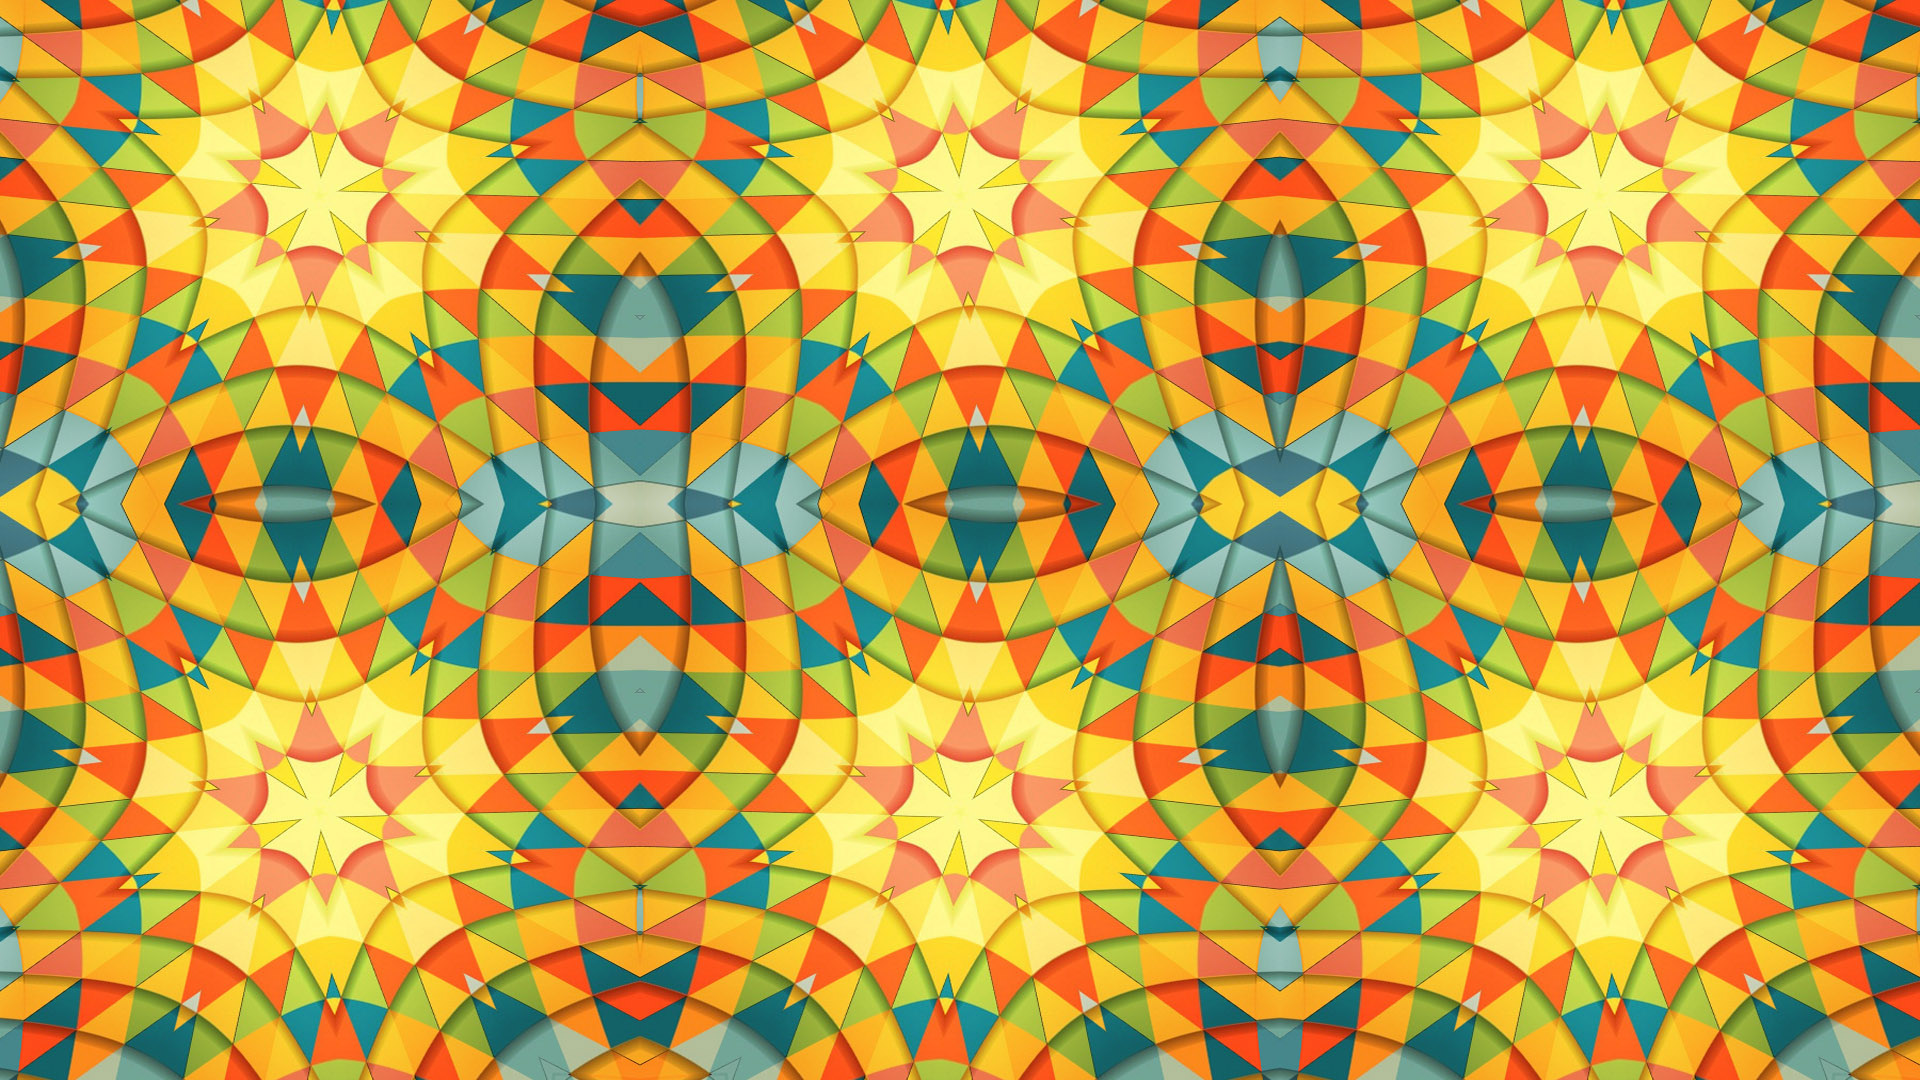 Abstract Artistic Colors Digital Art Kaleidoscope Pattern Psychedelic 1920x1080